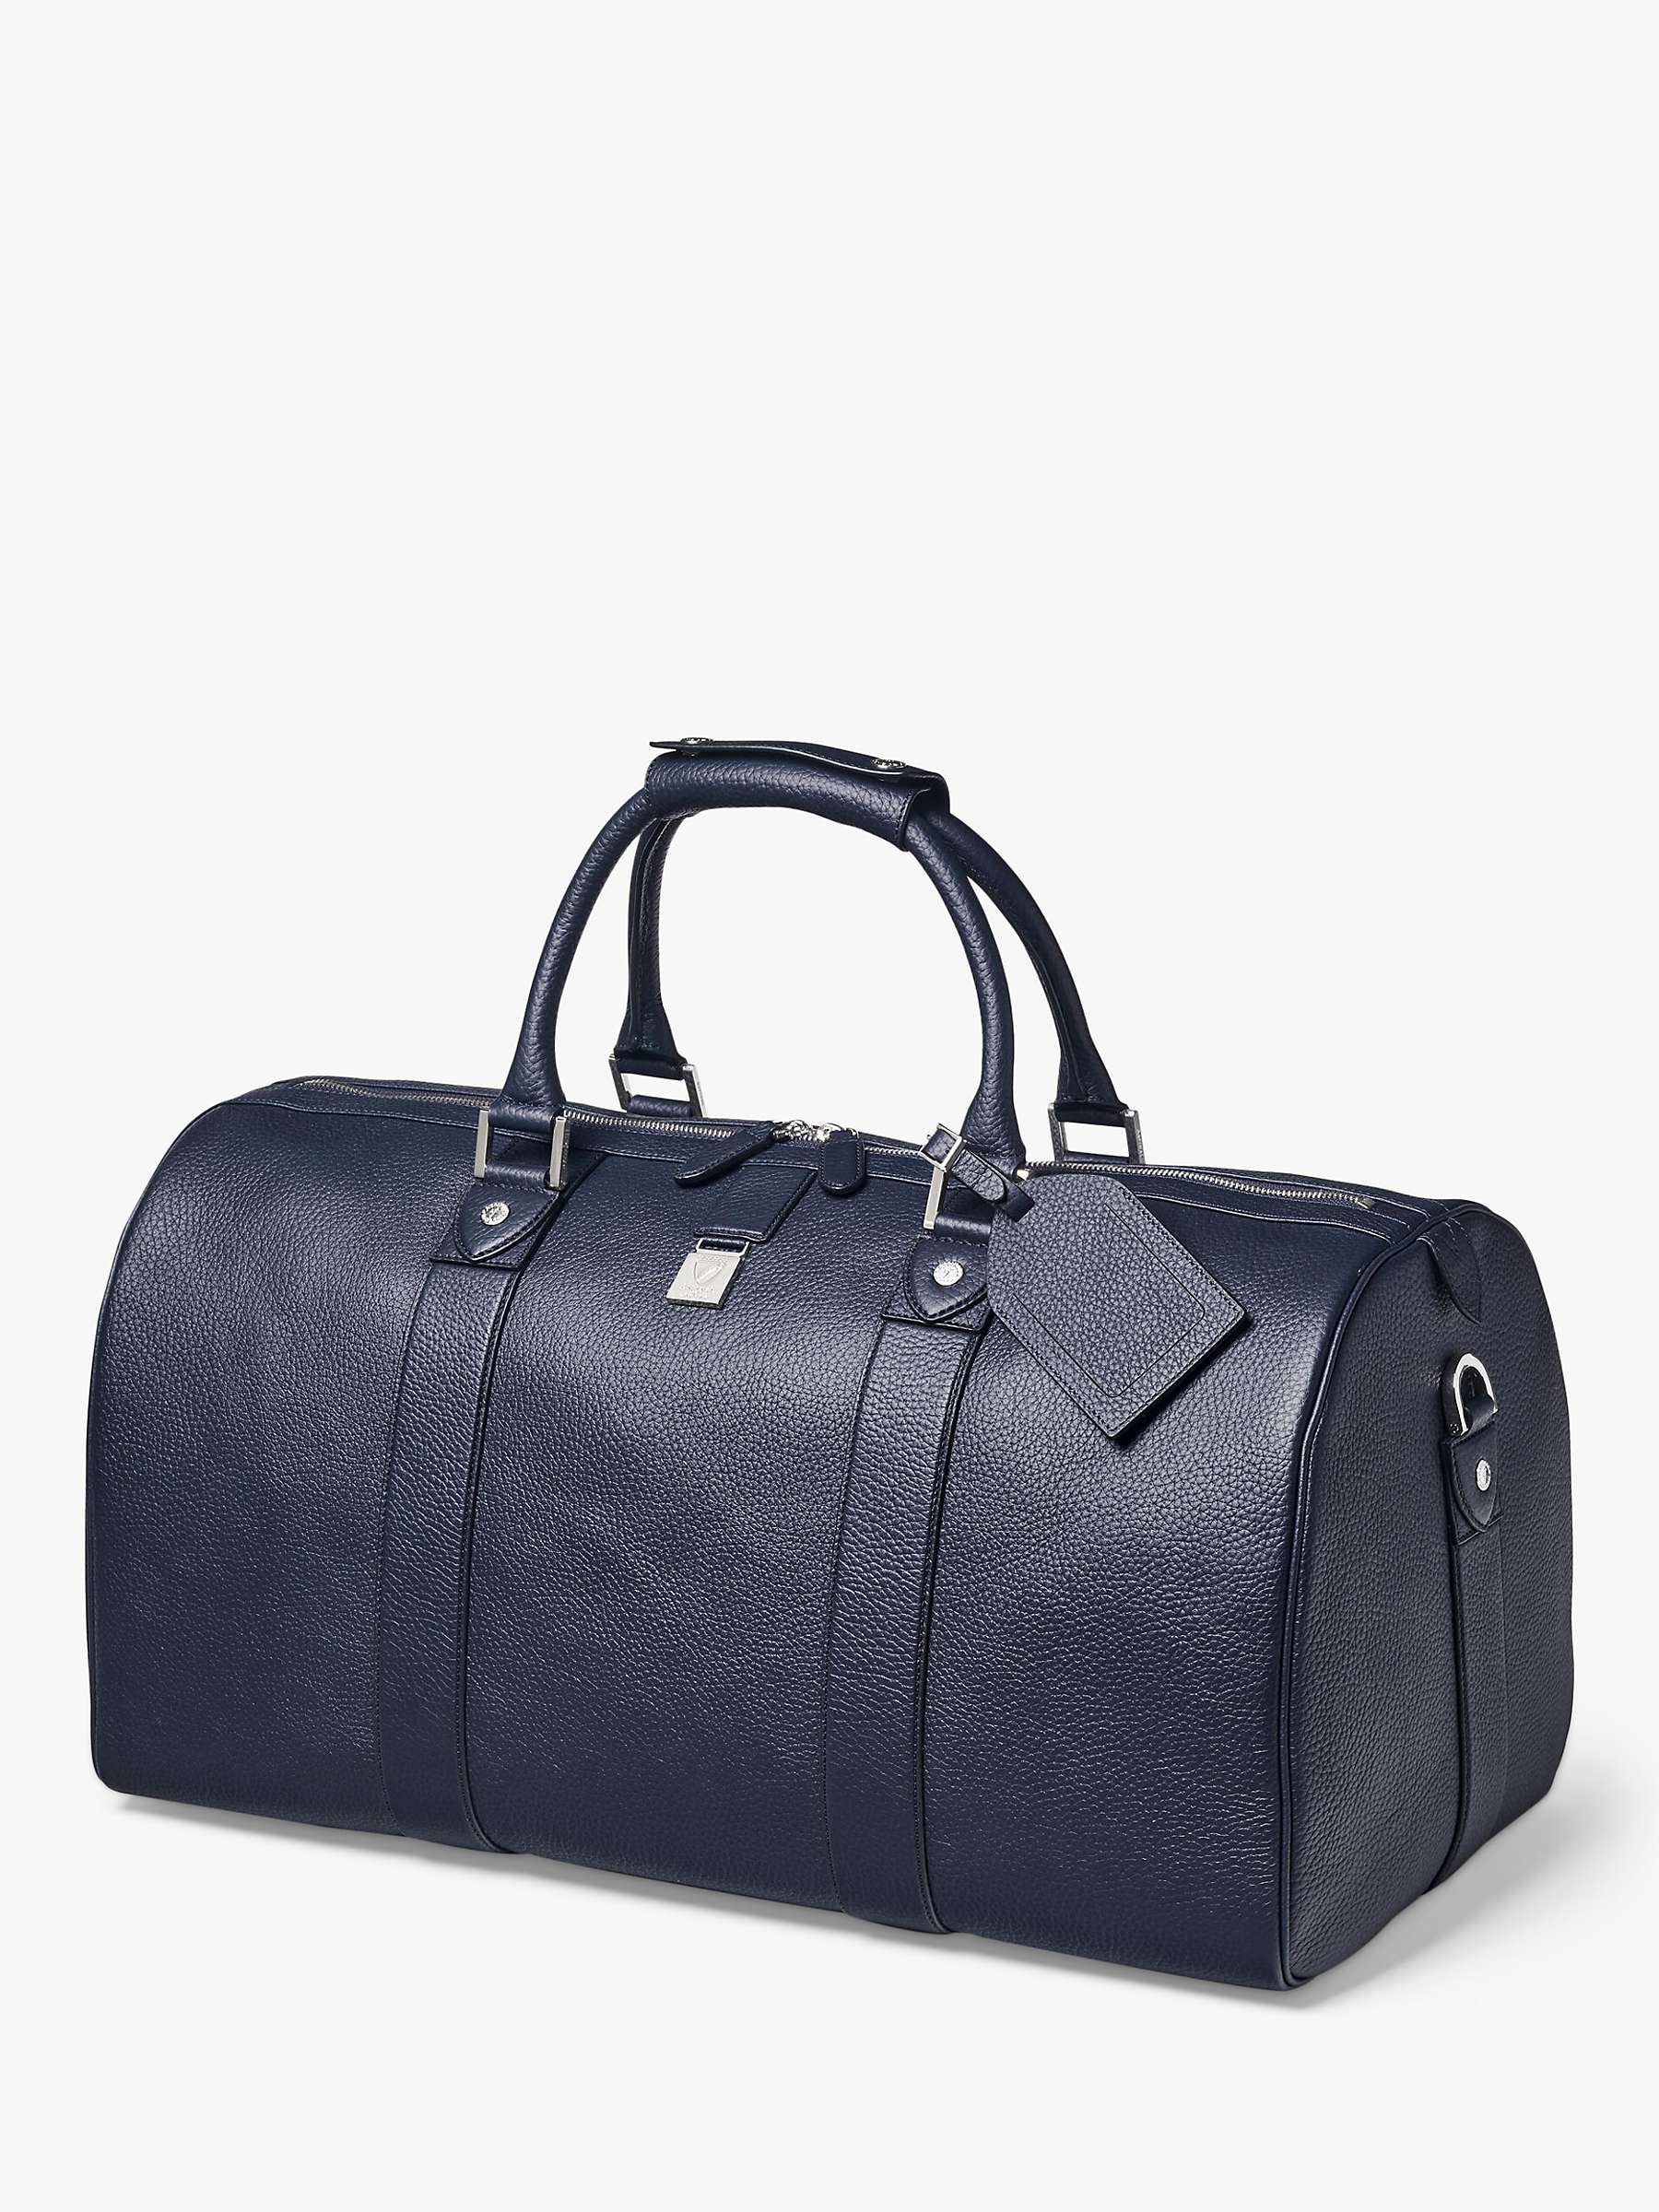 Buy Aspinal of London Boston Pebble Grain Leather Holdall Bag Online at johnlewis.com